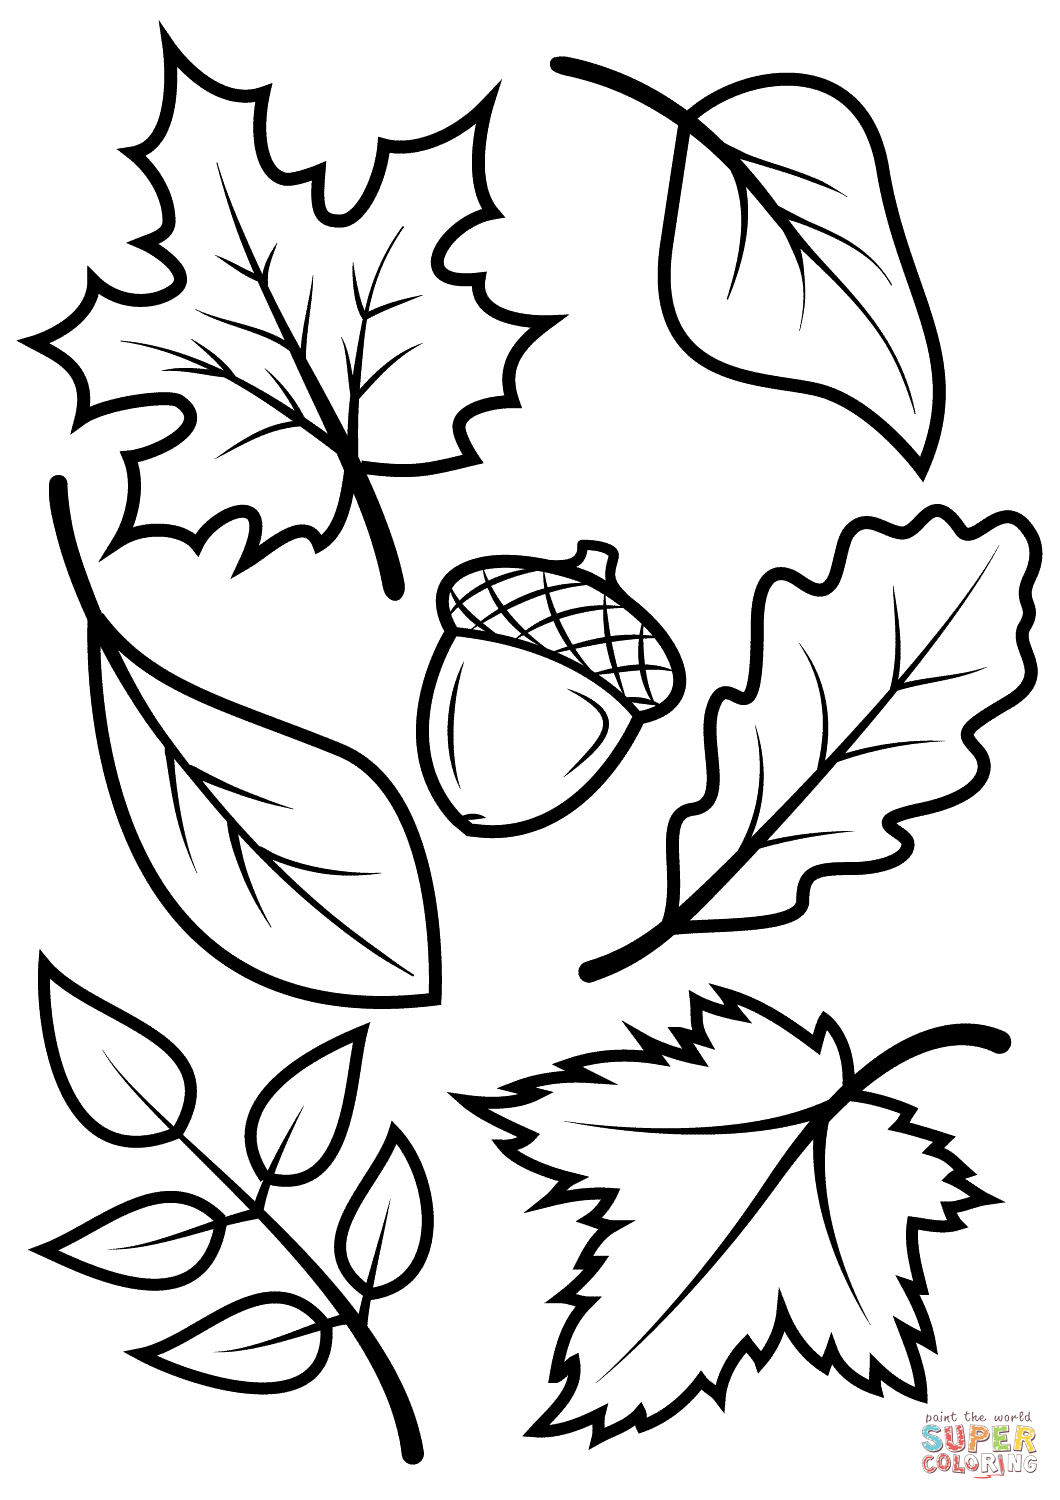 Fall Leaves And Acorn Coloring Page | Free Printable Coloring Pages - Free Printable Pictures Of Autumn Leaves